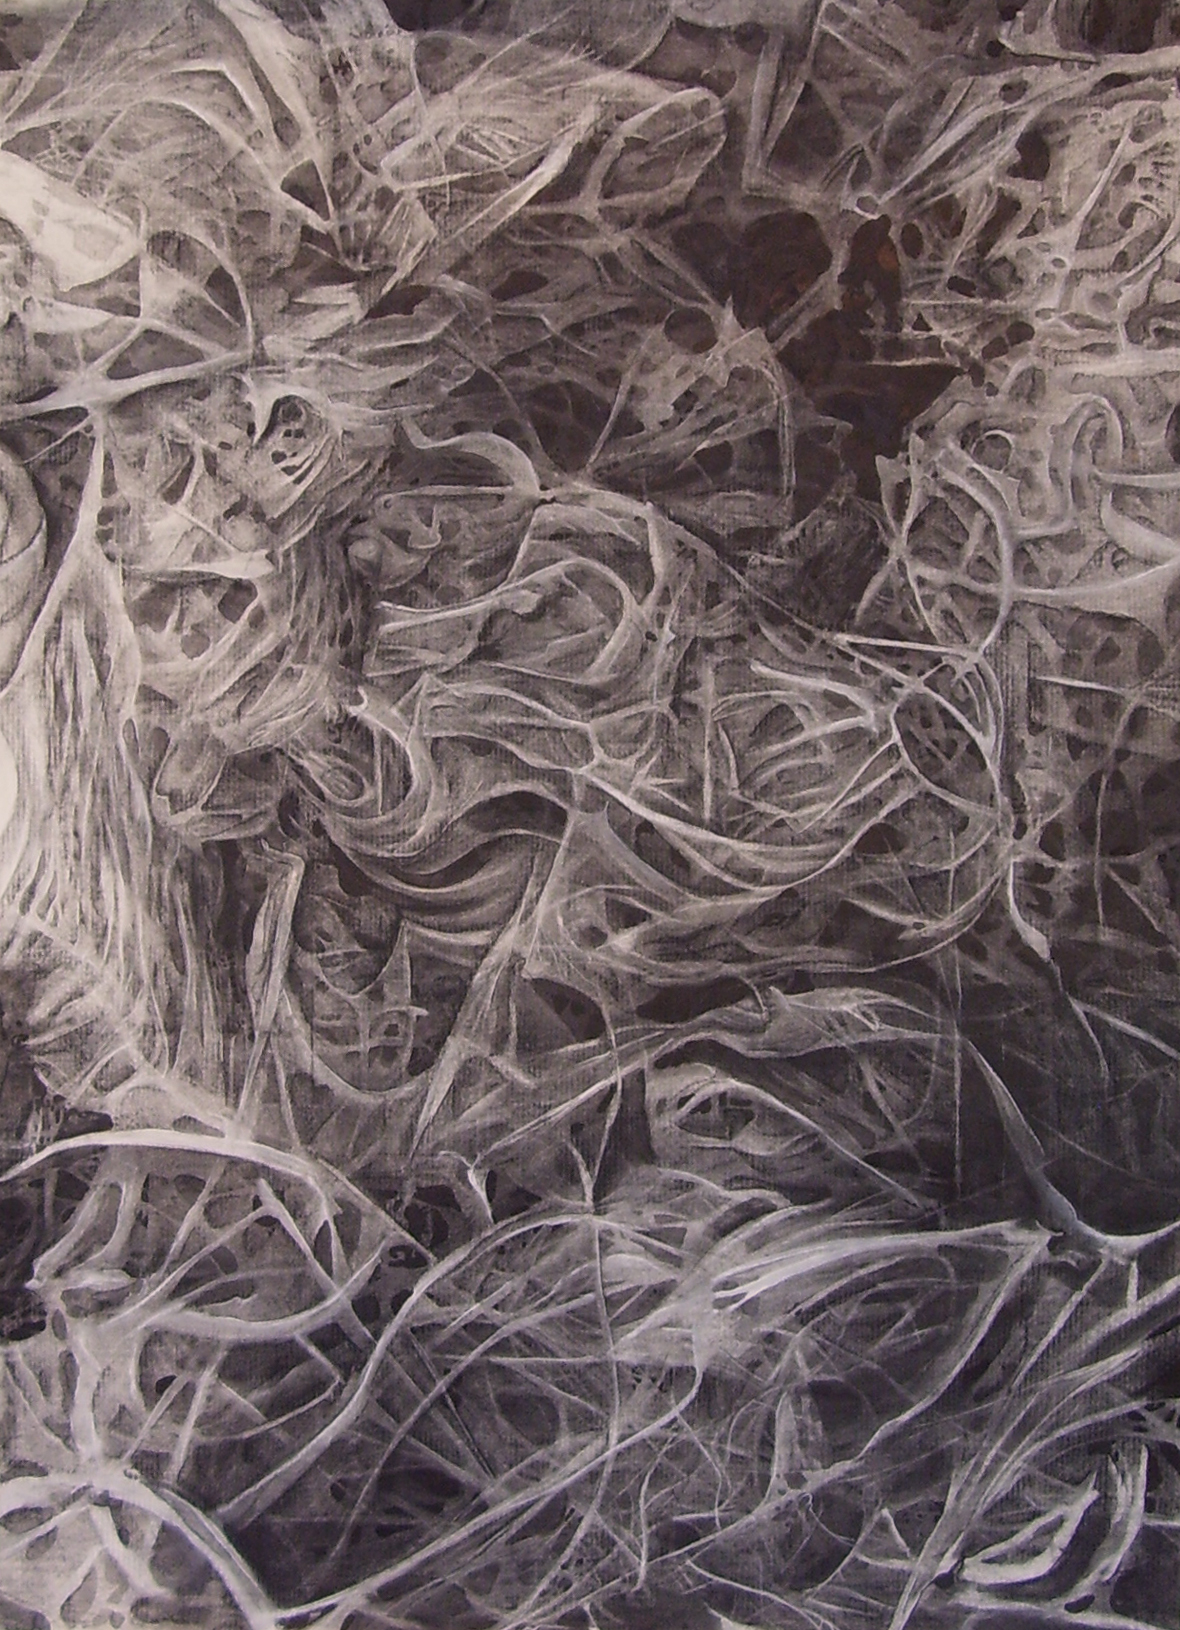  Metatectonic Activities/ 2002/ charcoal and ink on paper/ 45 x 33 inches 